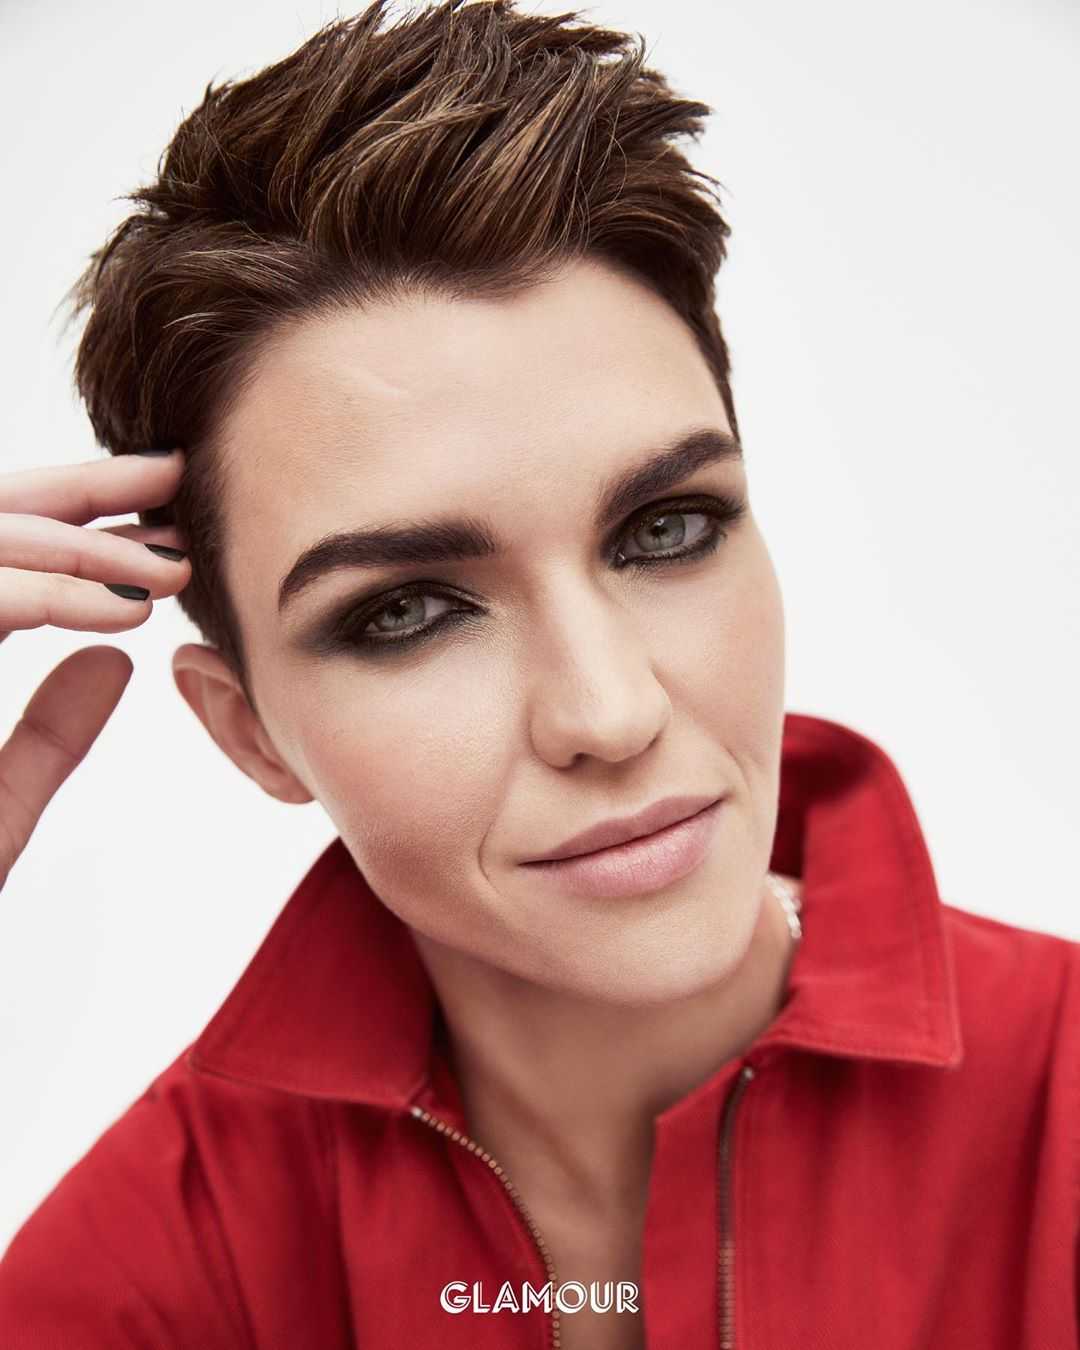 70+ Hot Pictures Of Ruby Rose – Batgirl In Arrowverse And Orange Is The New Black Star. 64